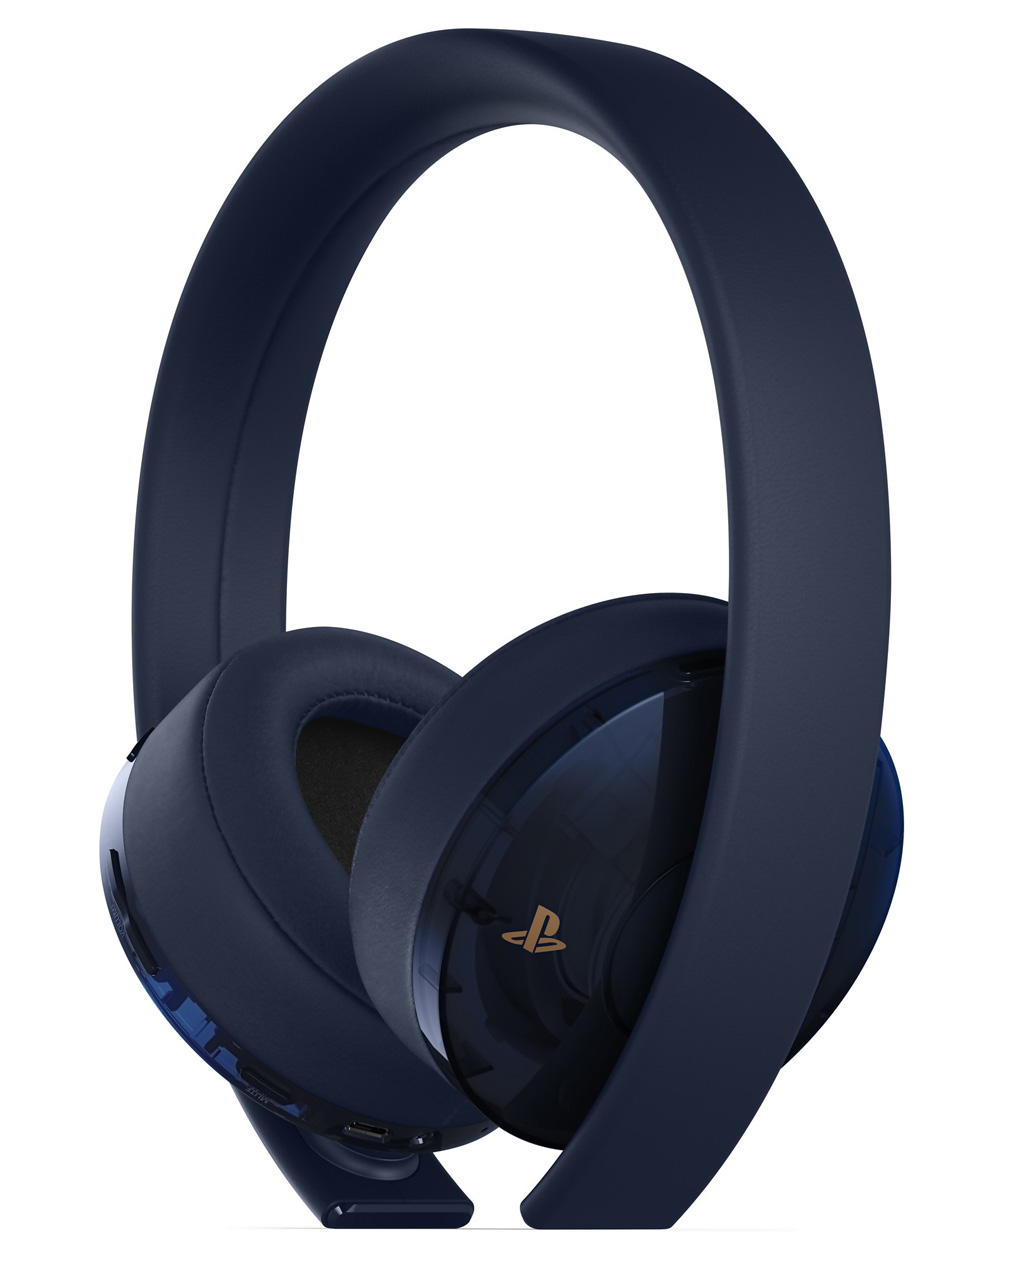 https://editioncollector.fr/wp-content/uploads/2018/08/img2-casque-ps4-gold-500-millions.jpg